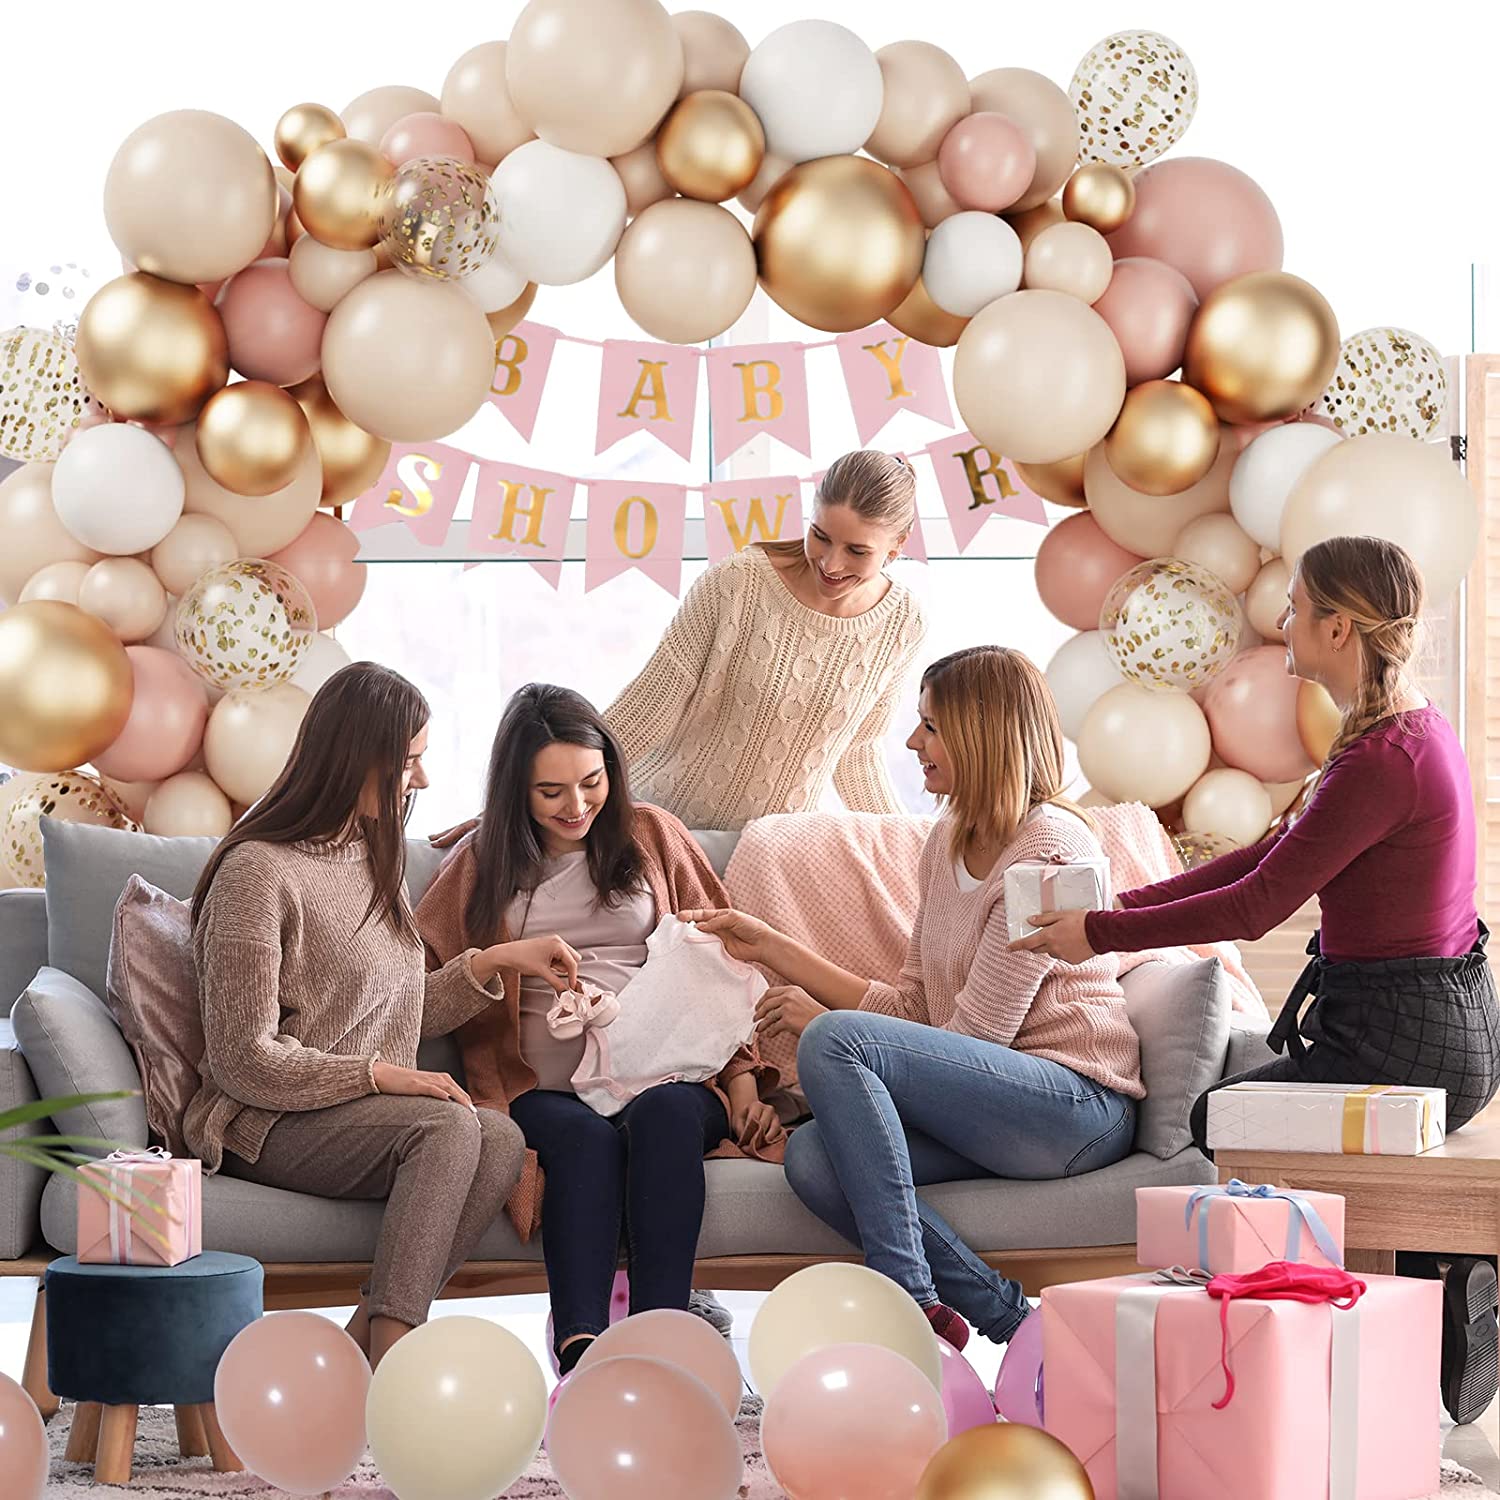 This is a set of 3 sets of blush balloons garland arch kits, perfect for girls&